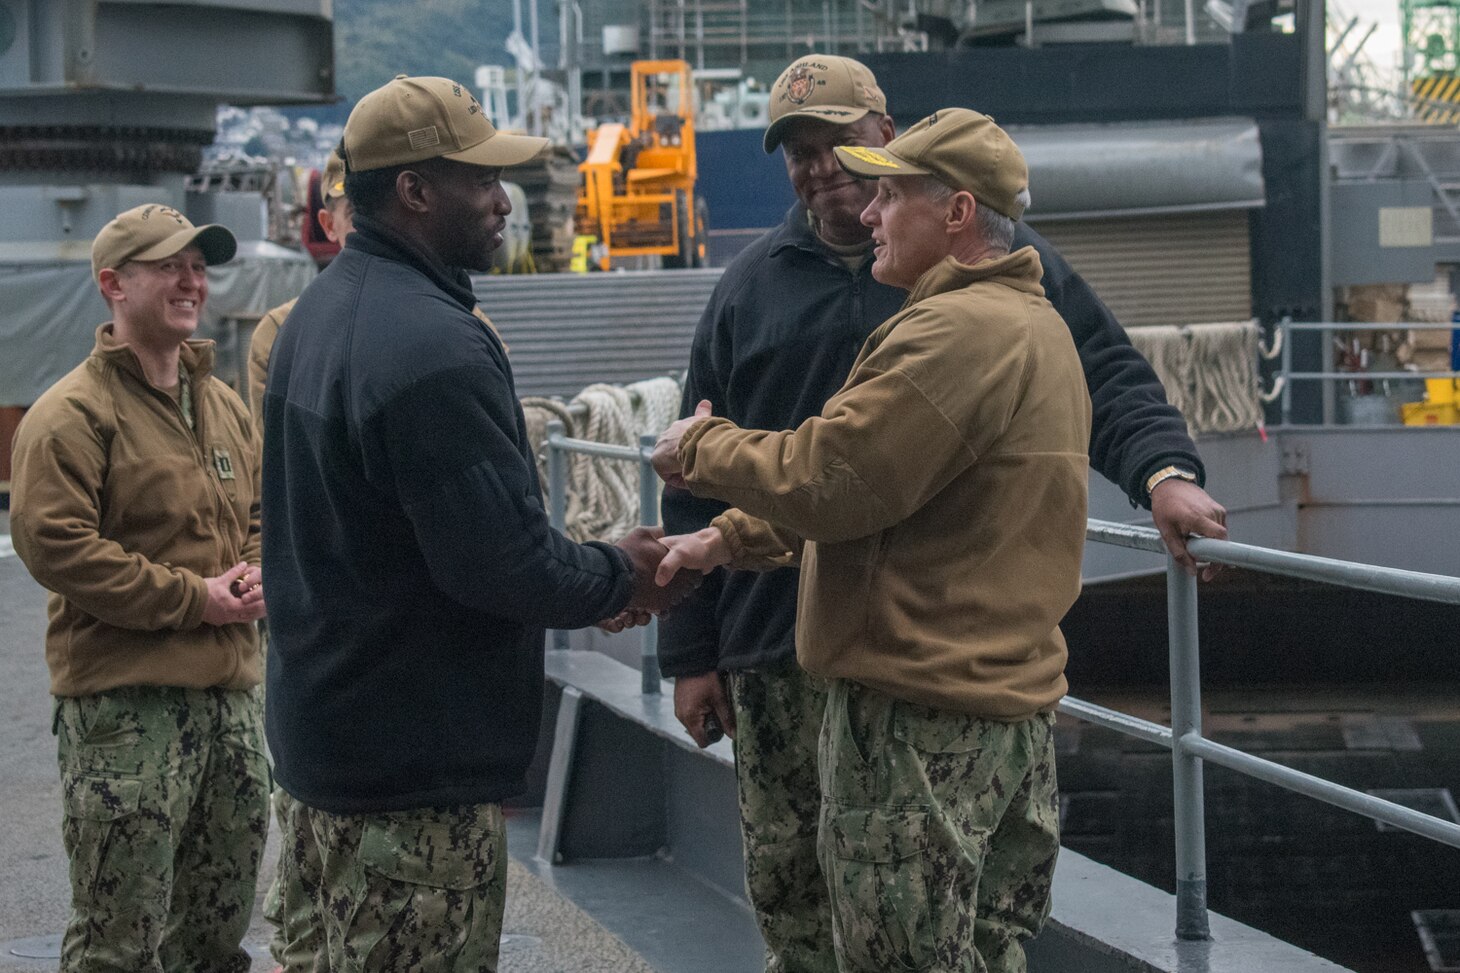 SASEBO, Japan (Jan. 9, 2019) Vice Adm. Phil Sawyer, the U.S. 7th Fleet commander, presents a coin to Boatswain’s Mate 2nd Class Walsham Morris, assigned to the amphibious dock landing ship USS Ashland (LSD 48), during a waterfront visit to forward deployed naval forces operating out of Fleet Activities Sasebo, Japan.